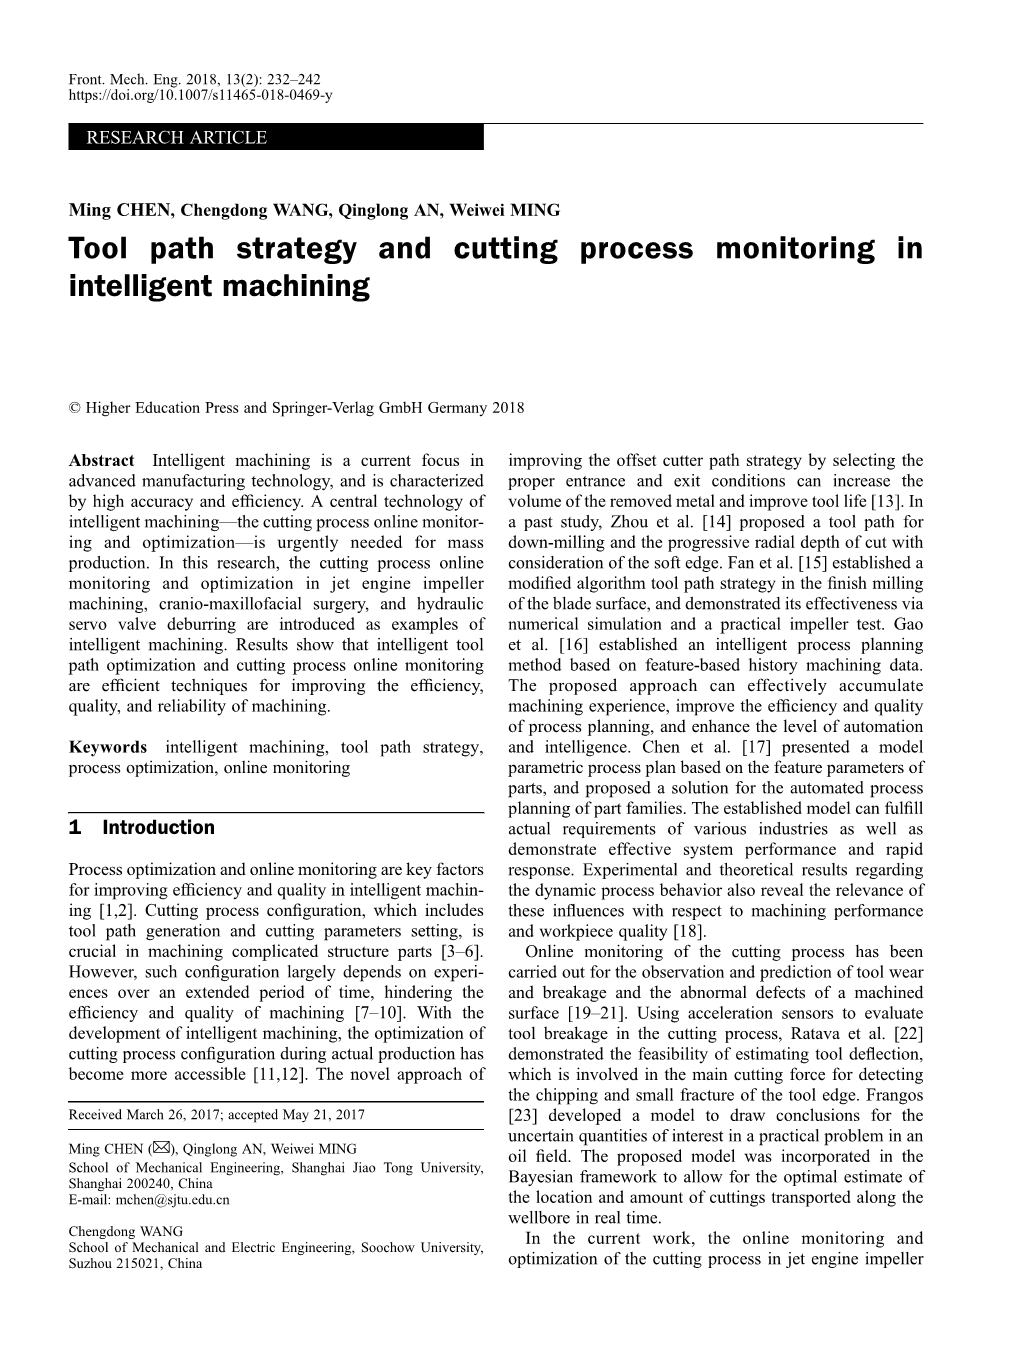 Tool Path Strategy and Cutting Process Monitoring in Intelligent Machining